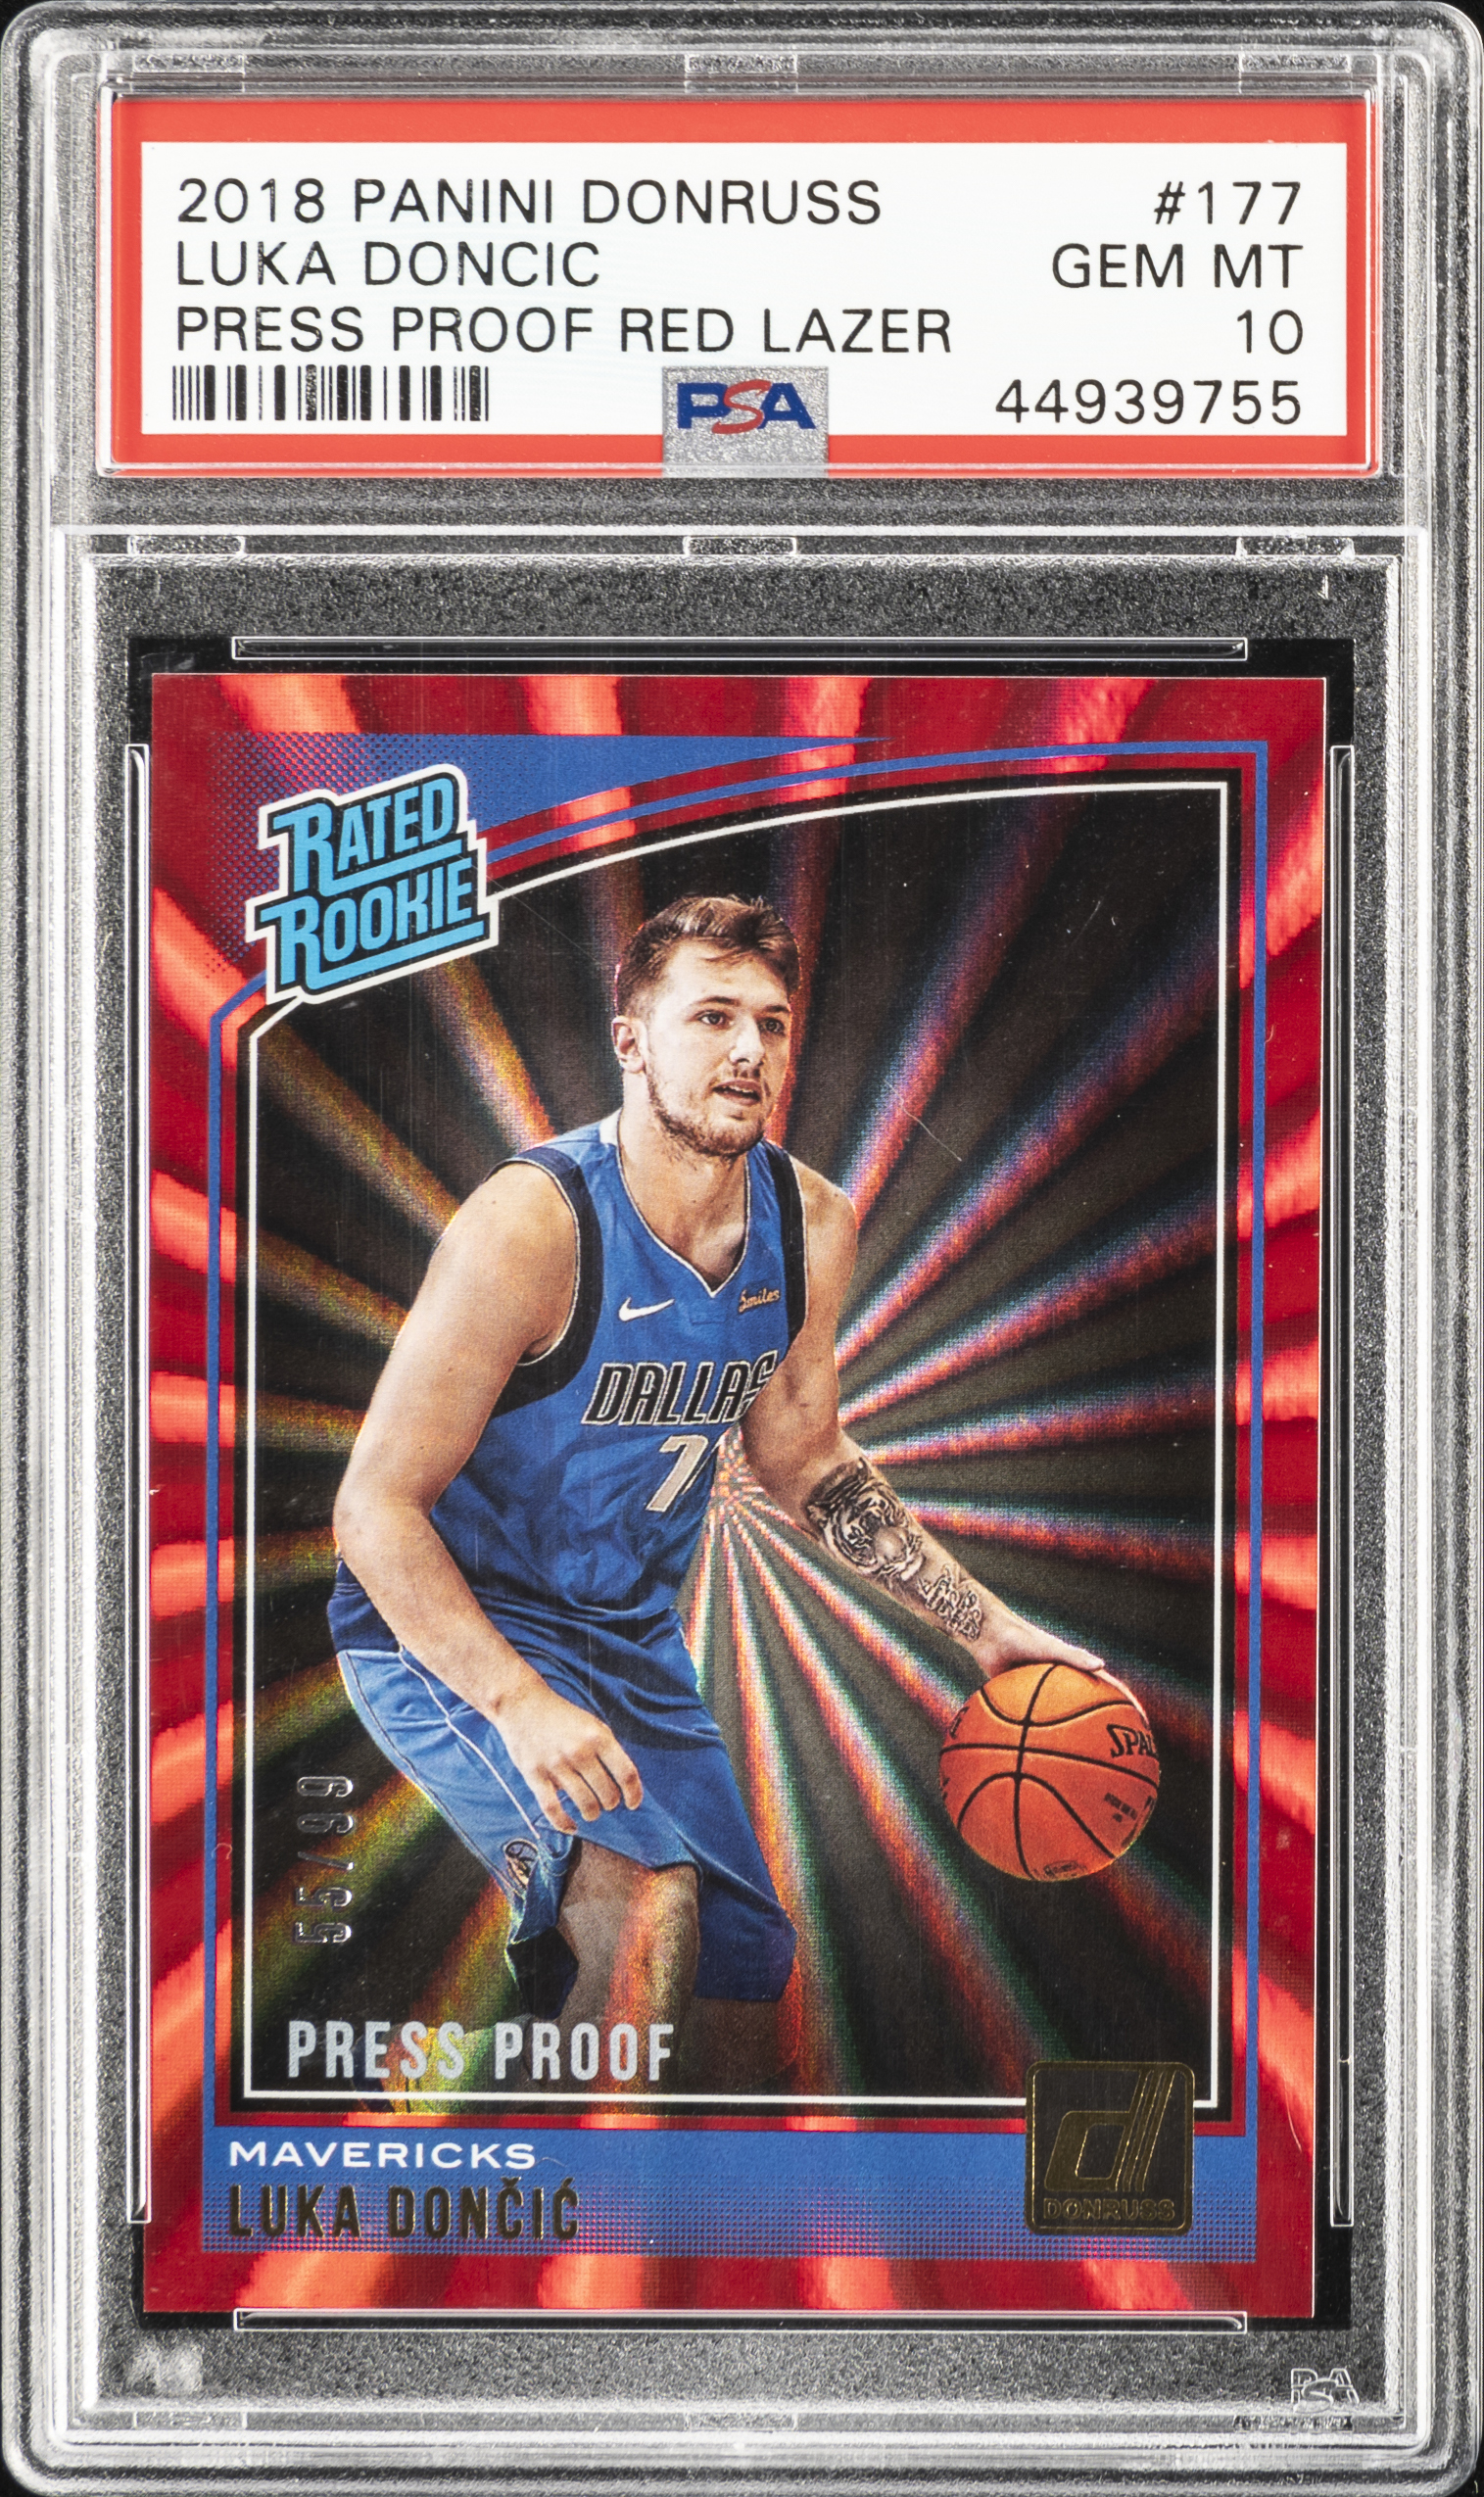 2018-19 Panini Donruss Press Proof Red Laser Rated Rookie #177 Luka Doncic Rookie Card (#55/99) – PSA GEM MT 10